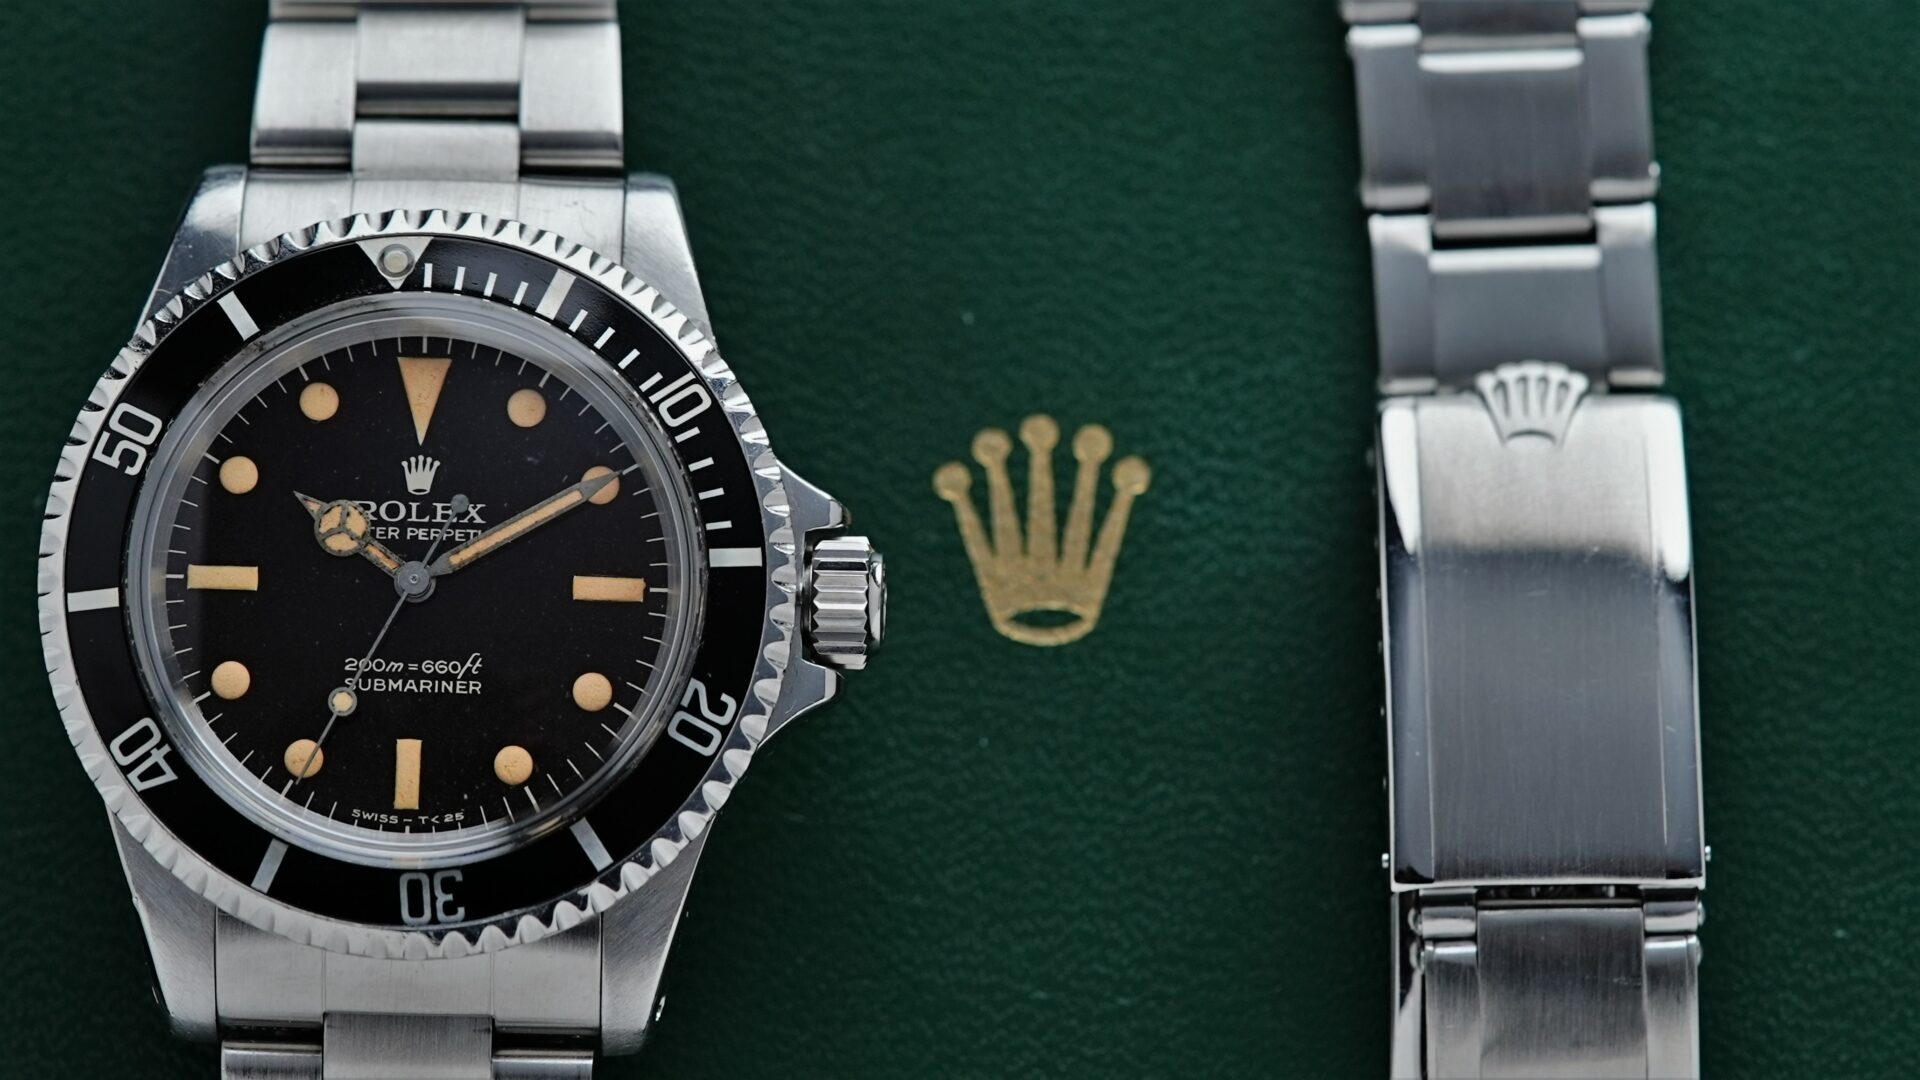 Rolex Submariner 5513 Bart Simpson Tropical Dial Original Patina Unpolished watch with bracelet.